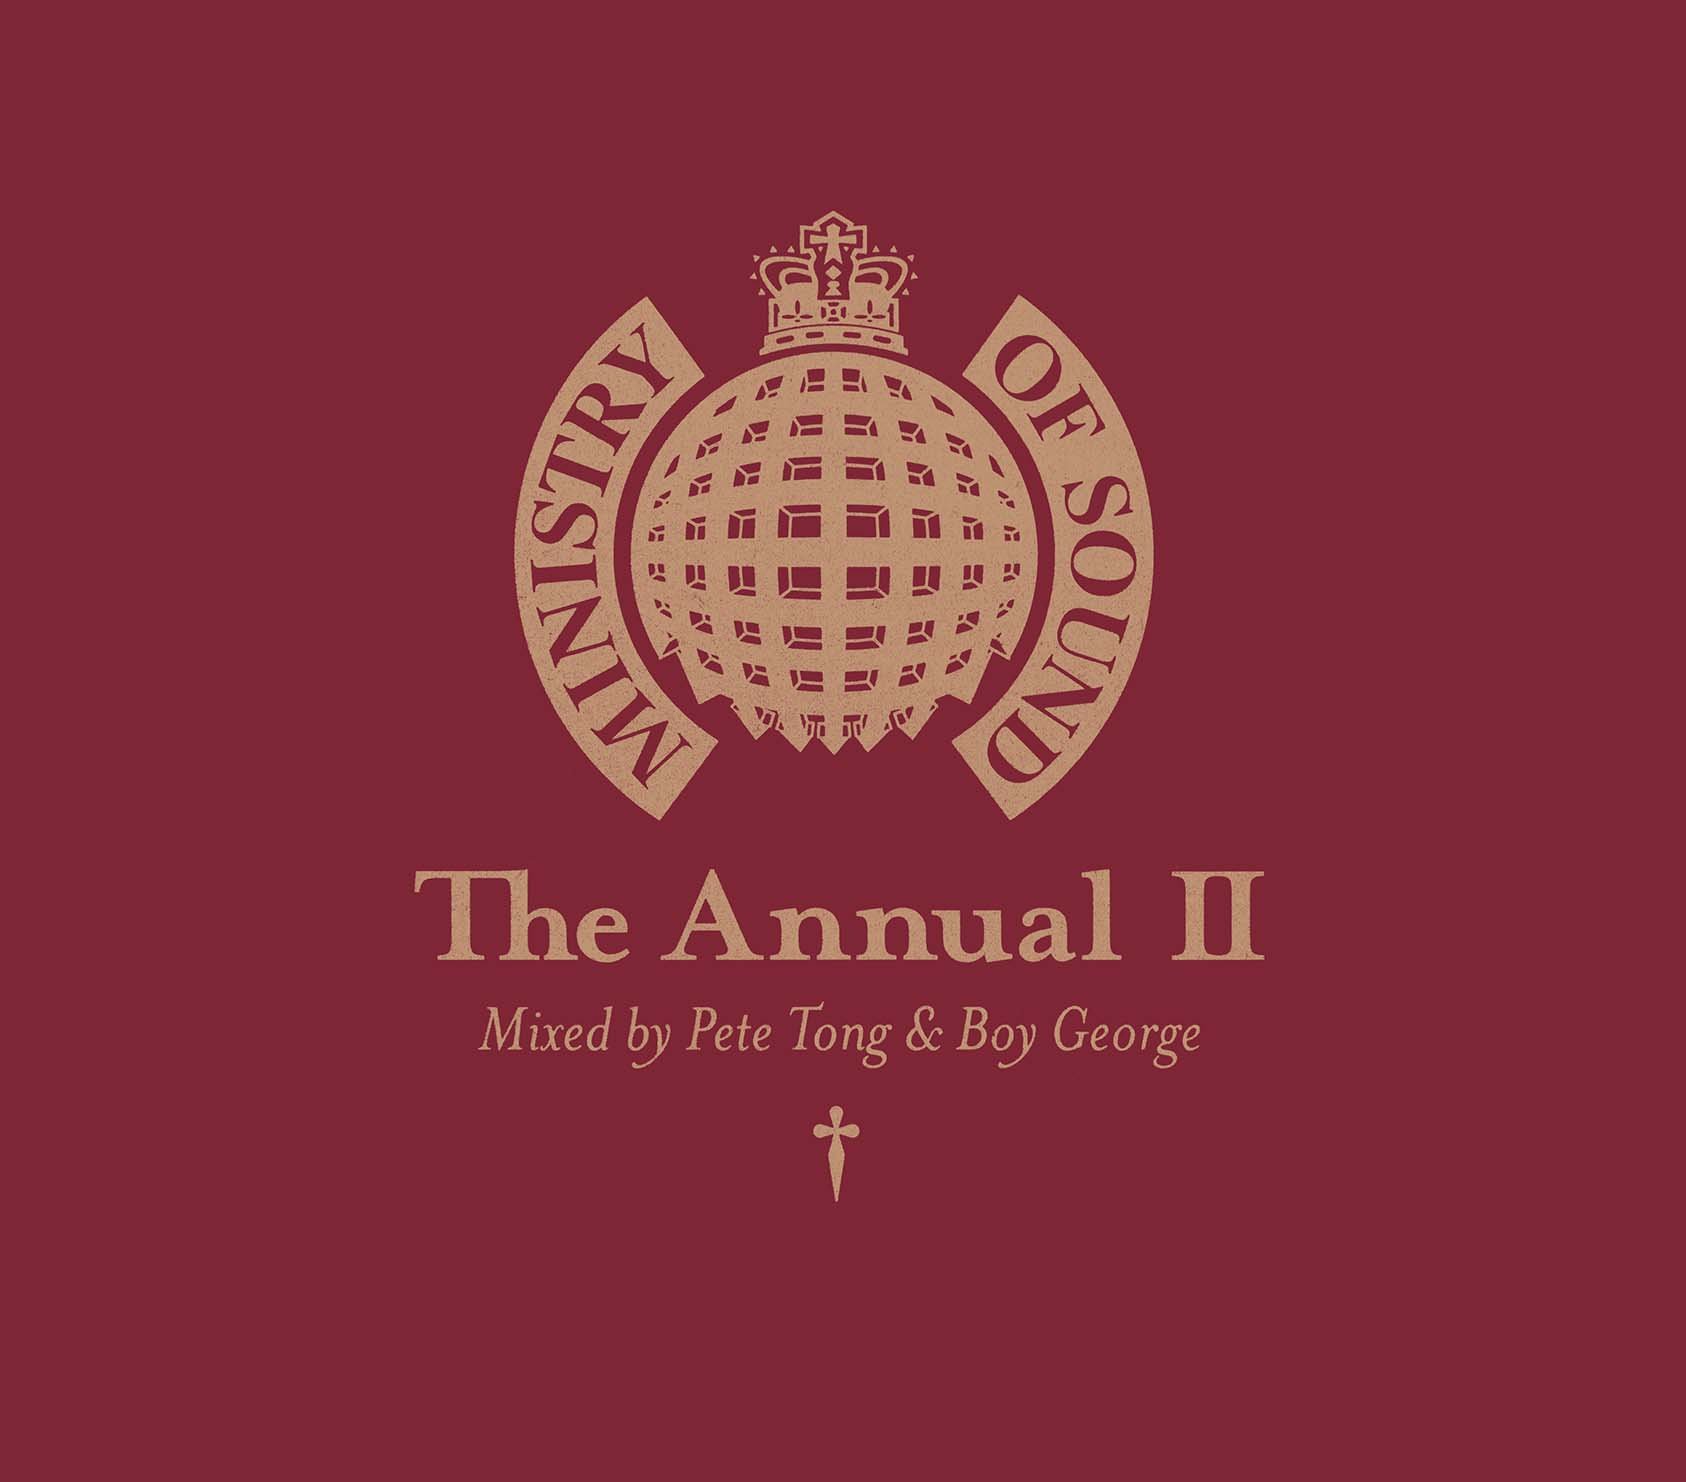 Ministry of Sound: The Annual II — Pete Tong / Boy George | Last.fm